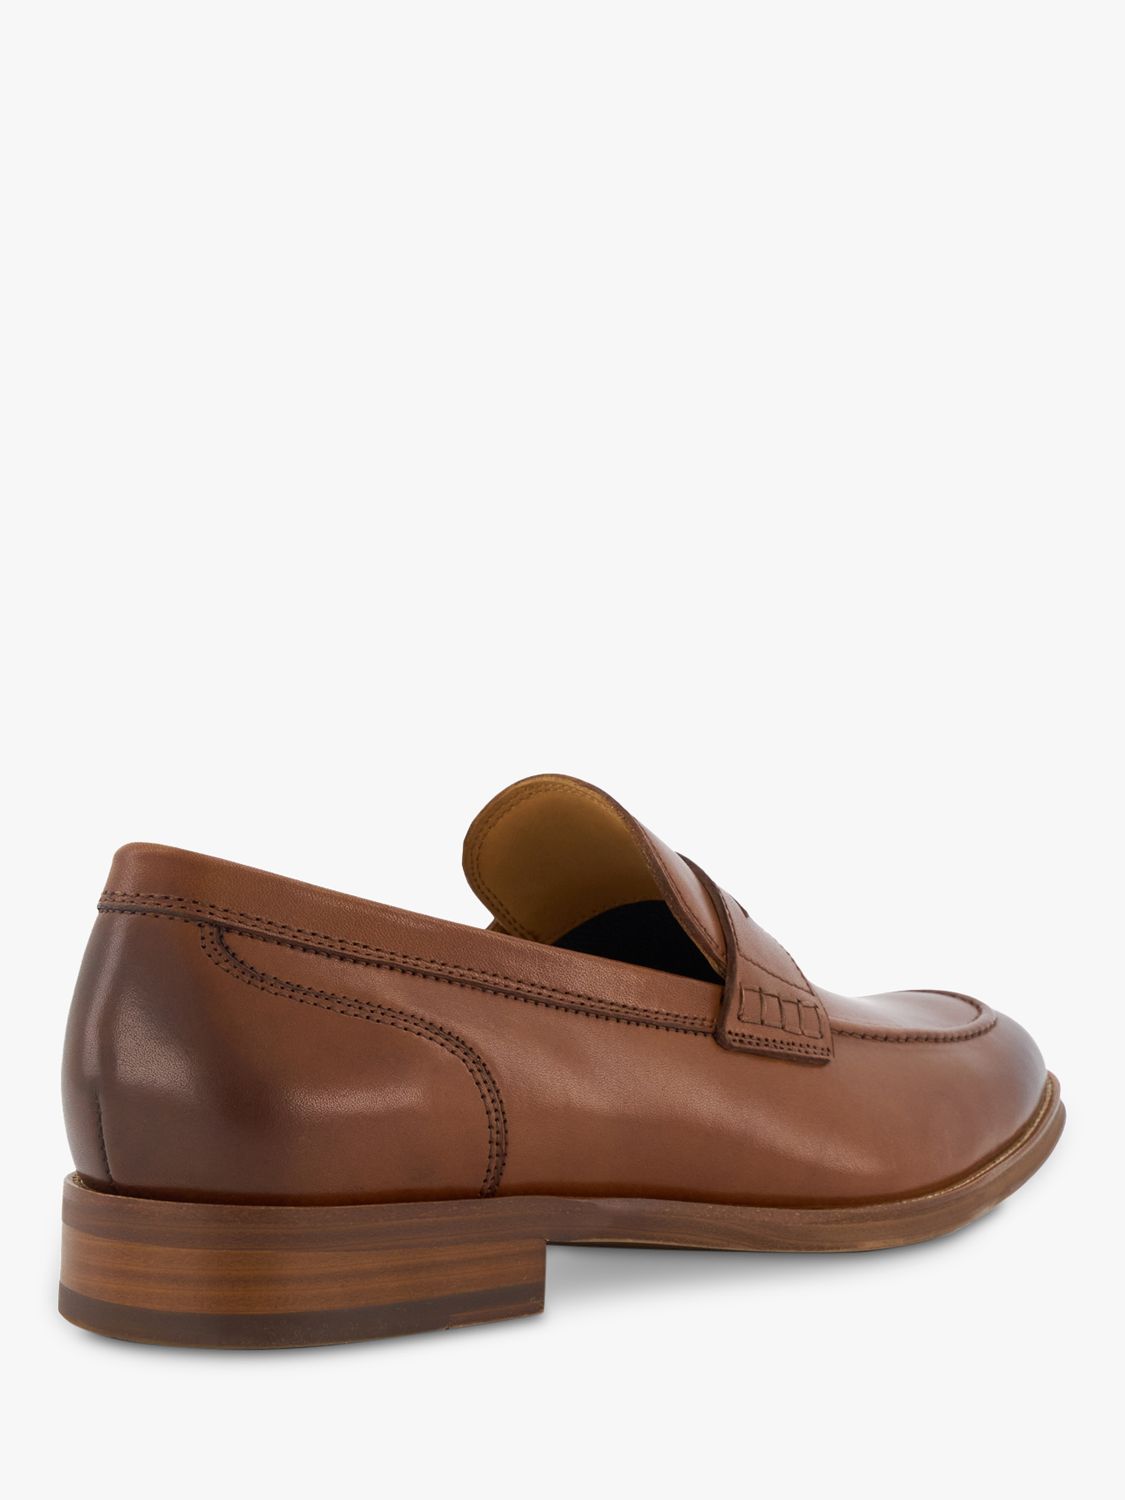 Dune Wide Fit Sulli Leather Penny Loafers, Tan, 11